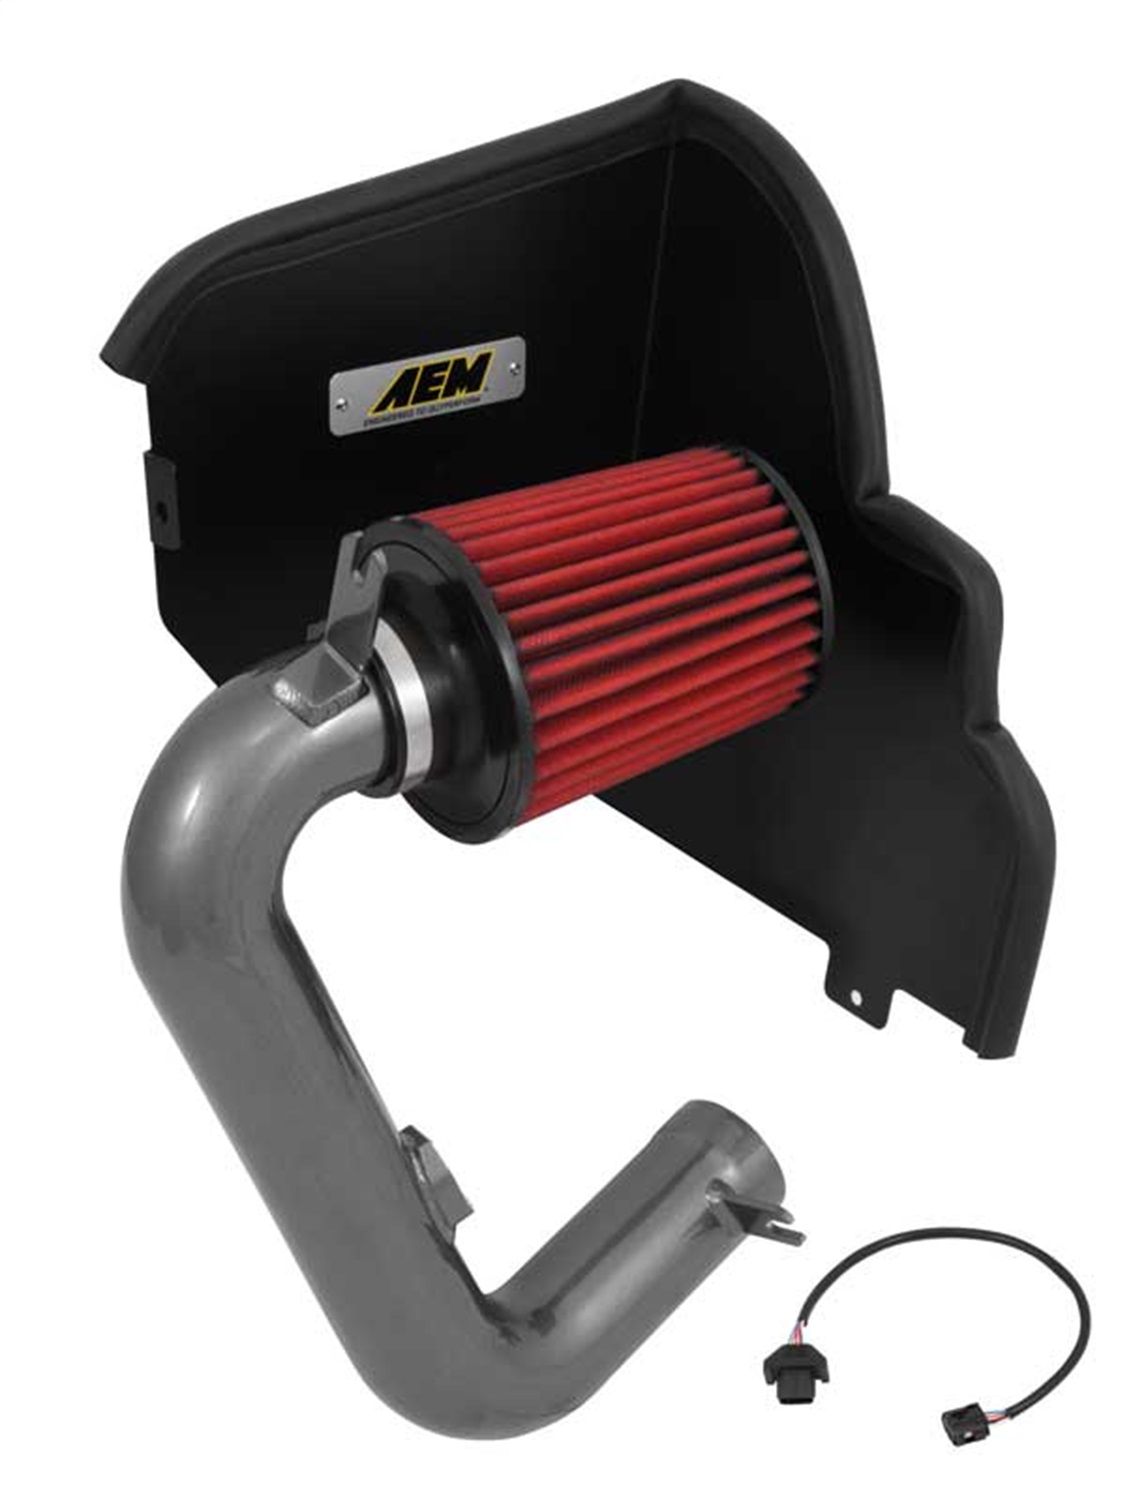 AEM Induction AEM Induction 21-732C Cold Air Induction System Fits 15 WRX